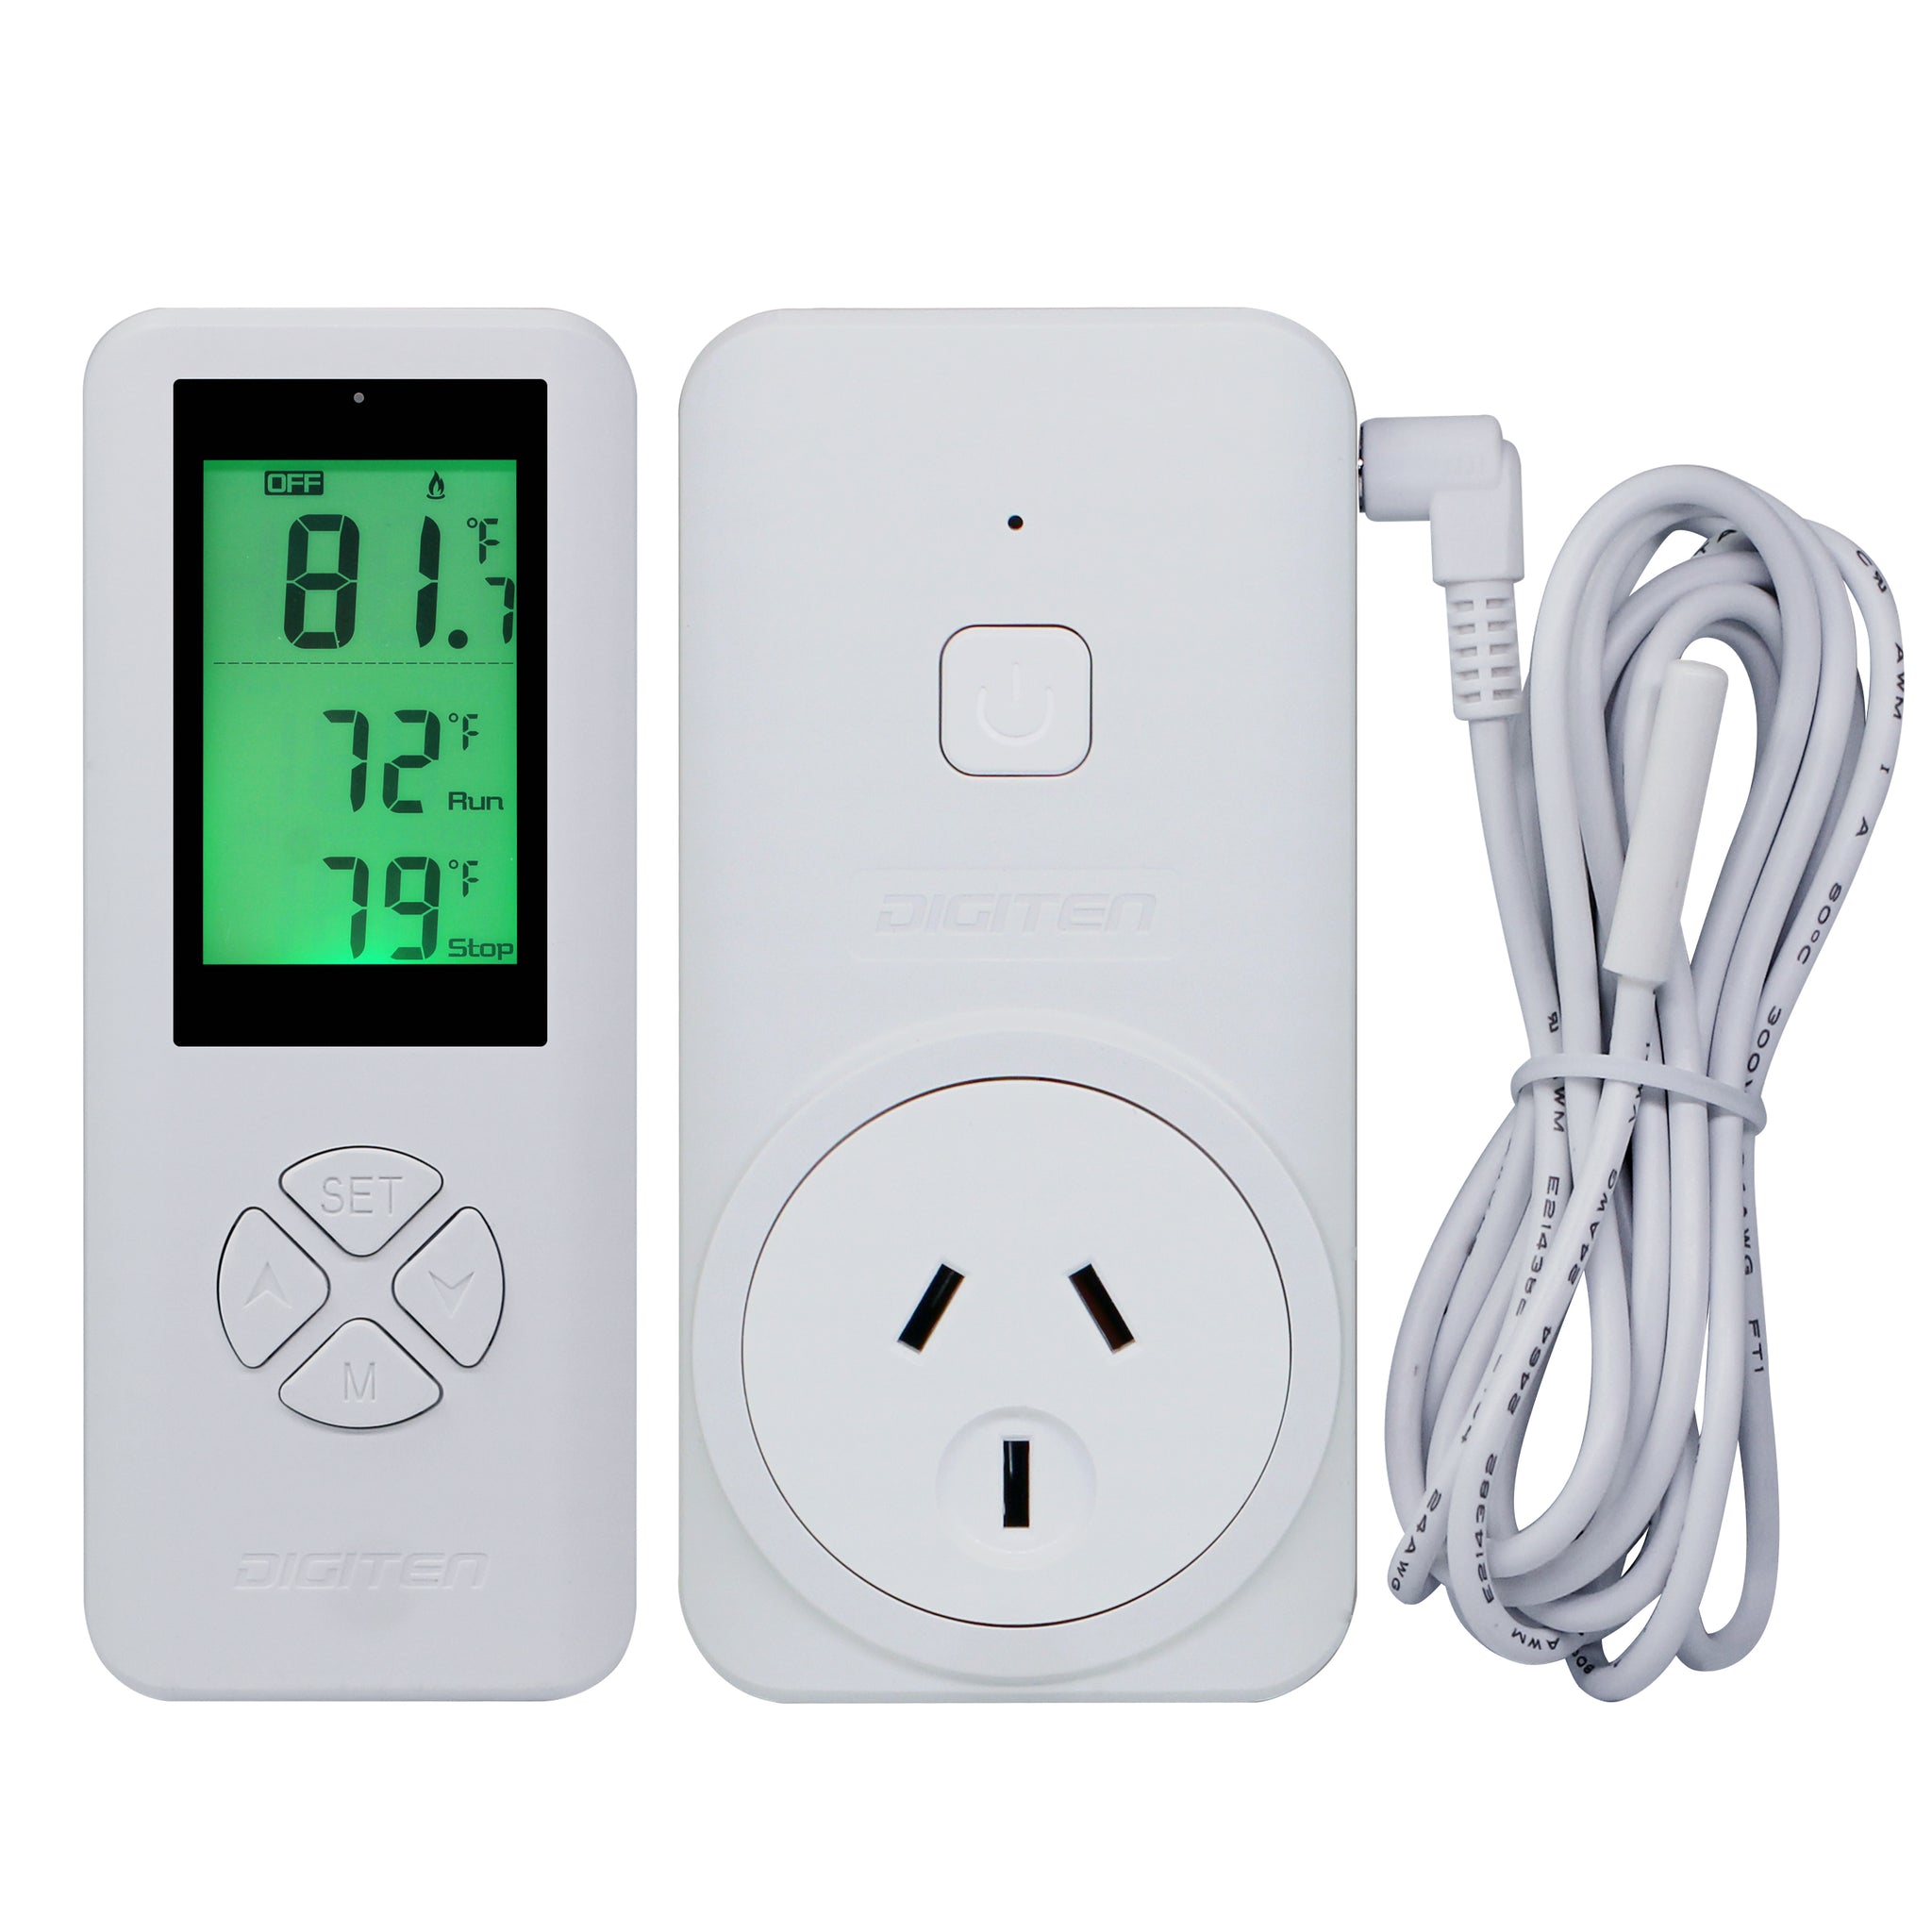 DIGITEN Wireless Thermostat Outlet WTC200 Digital Temperature Controll